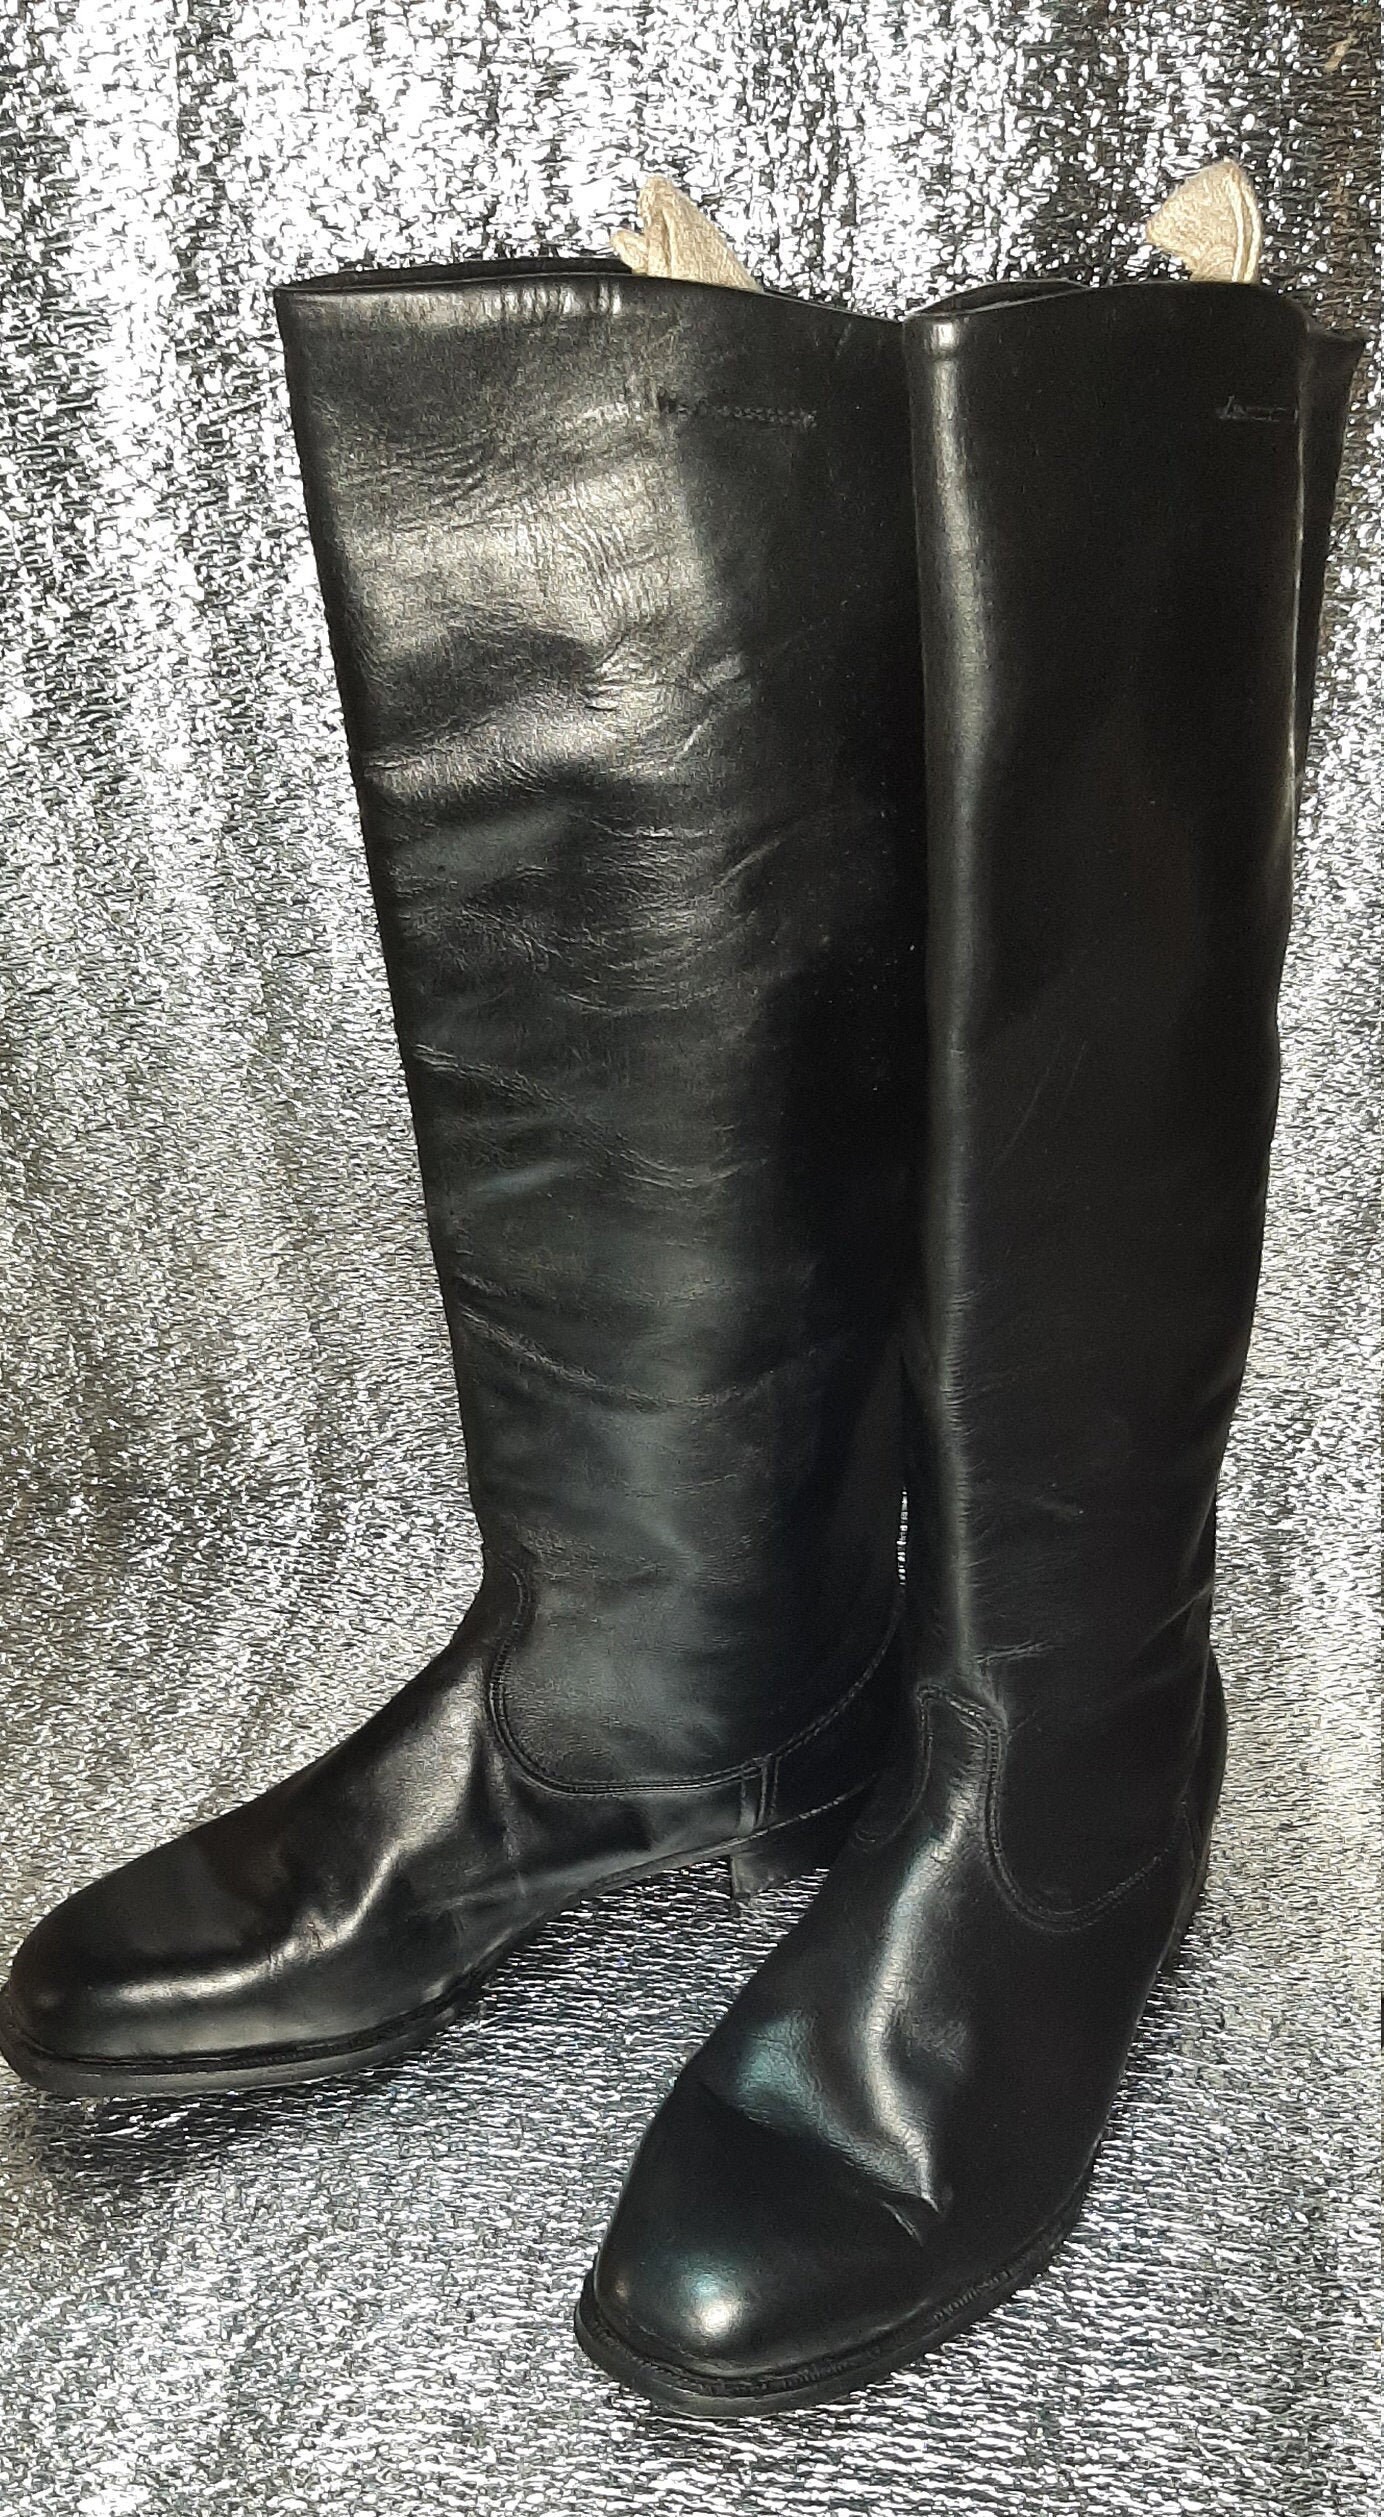 Vintage Military Chrome Boots Army Officer USSR | Etsy